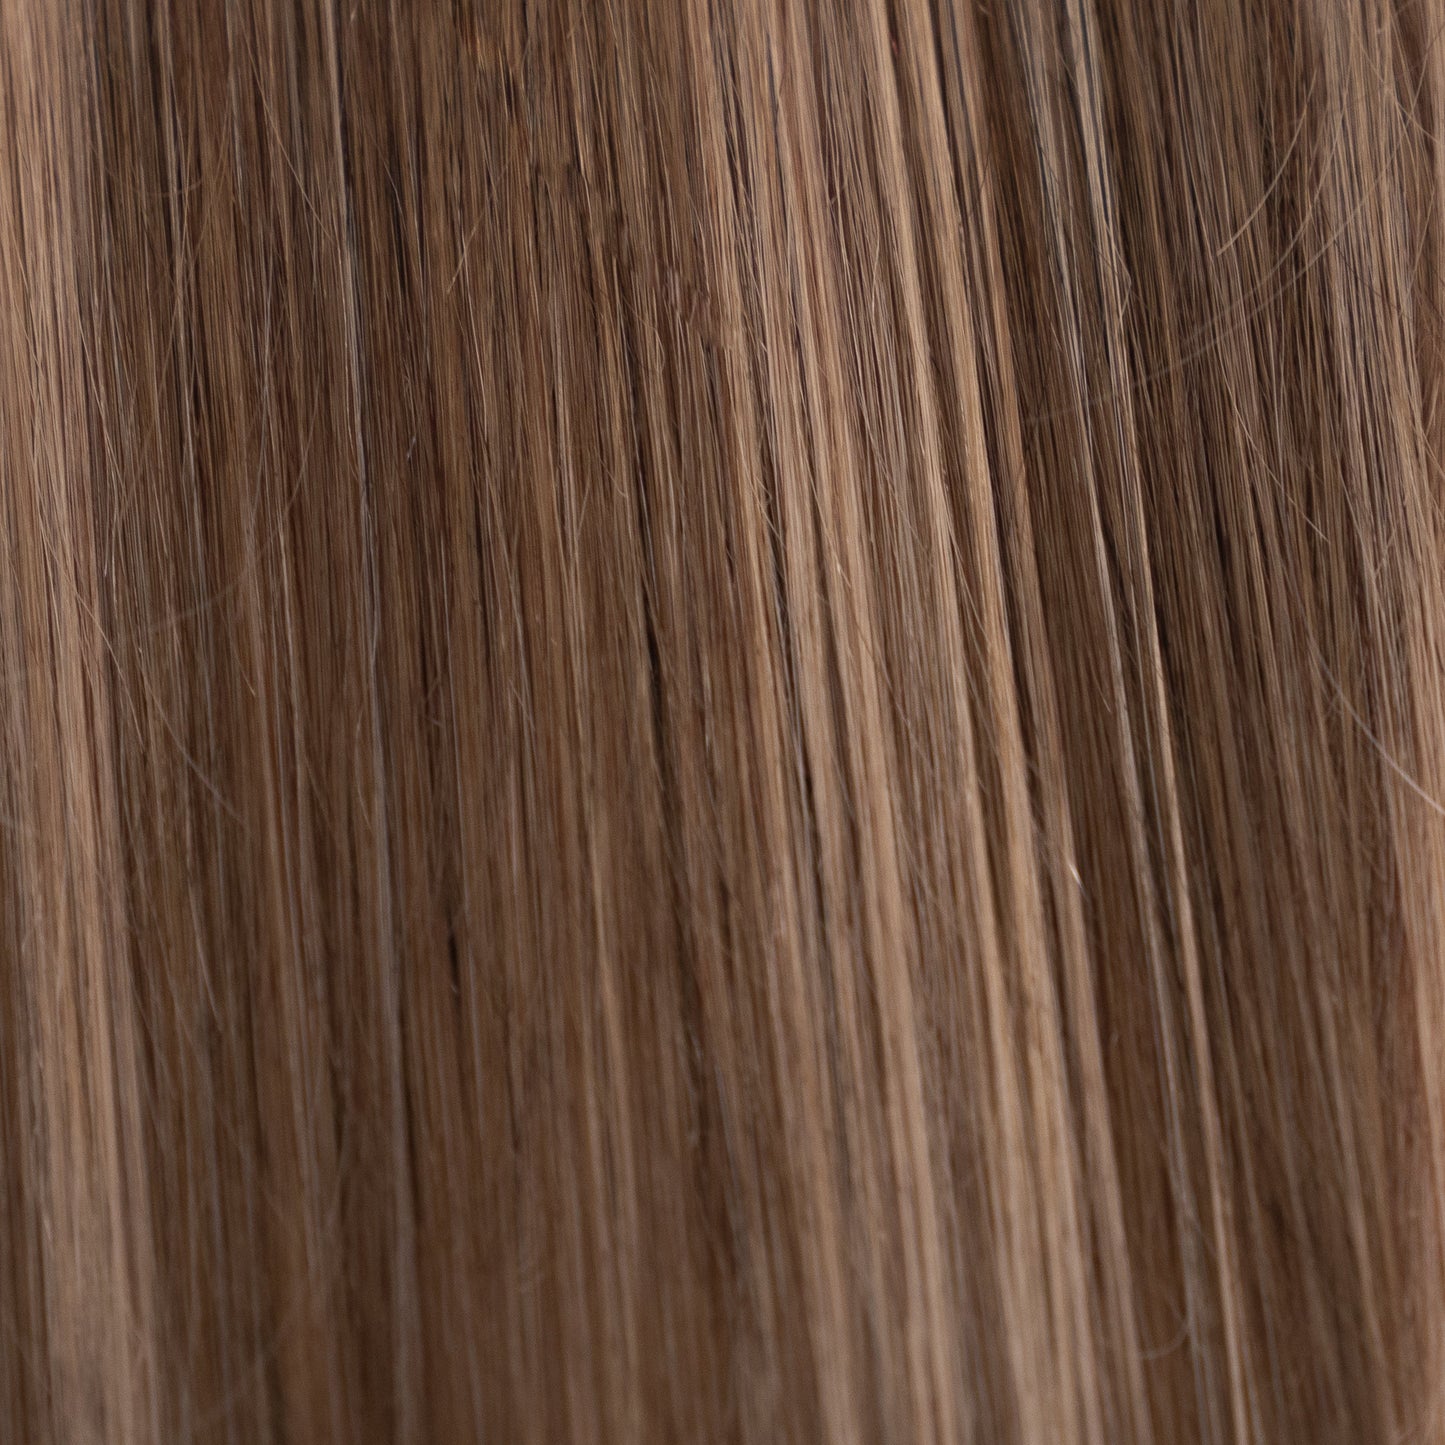 I-Tip 16" 25g Professional Hair Extensions - Chocolate Brown Highlight #4/#27